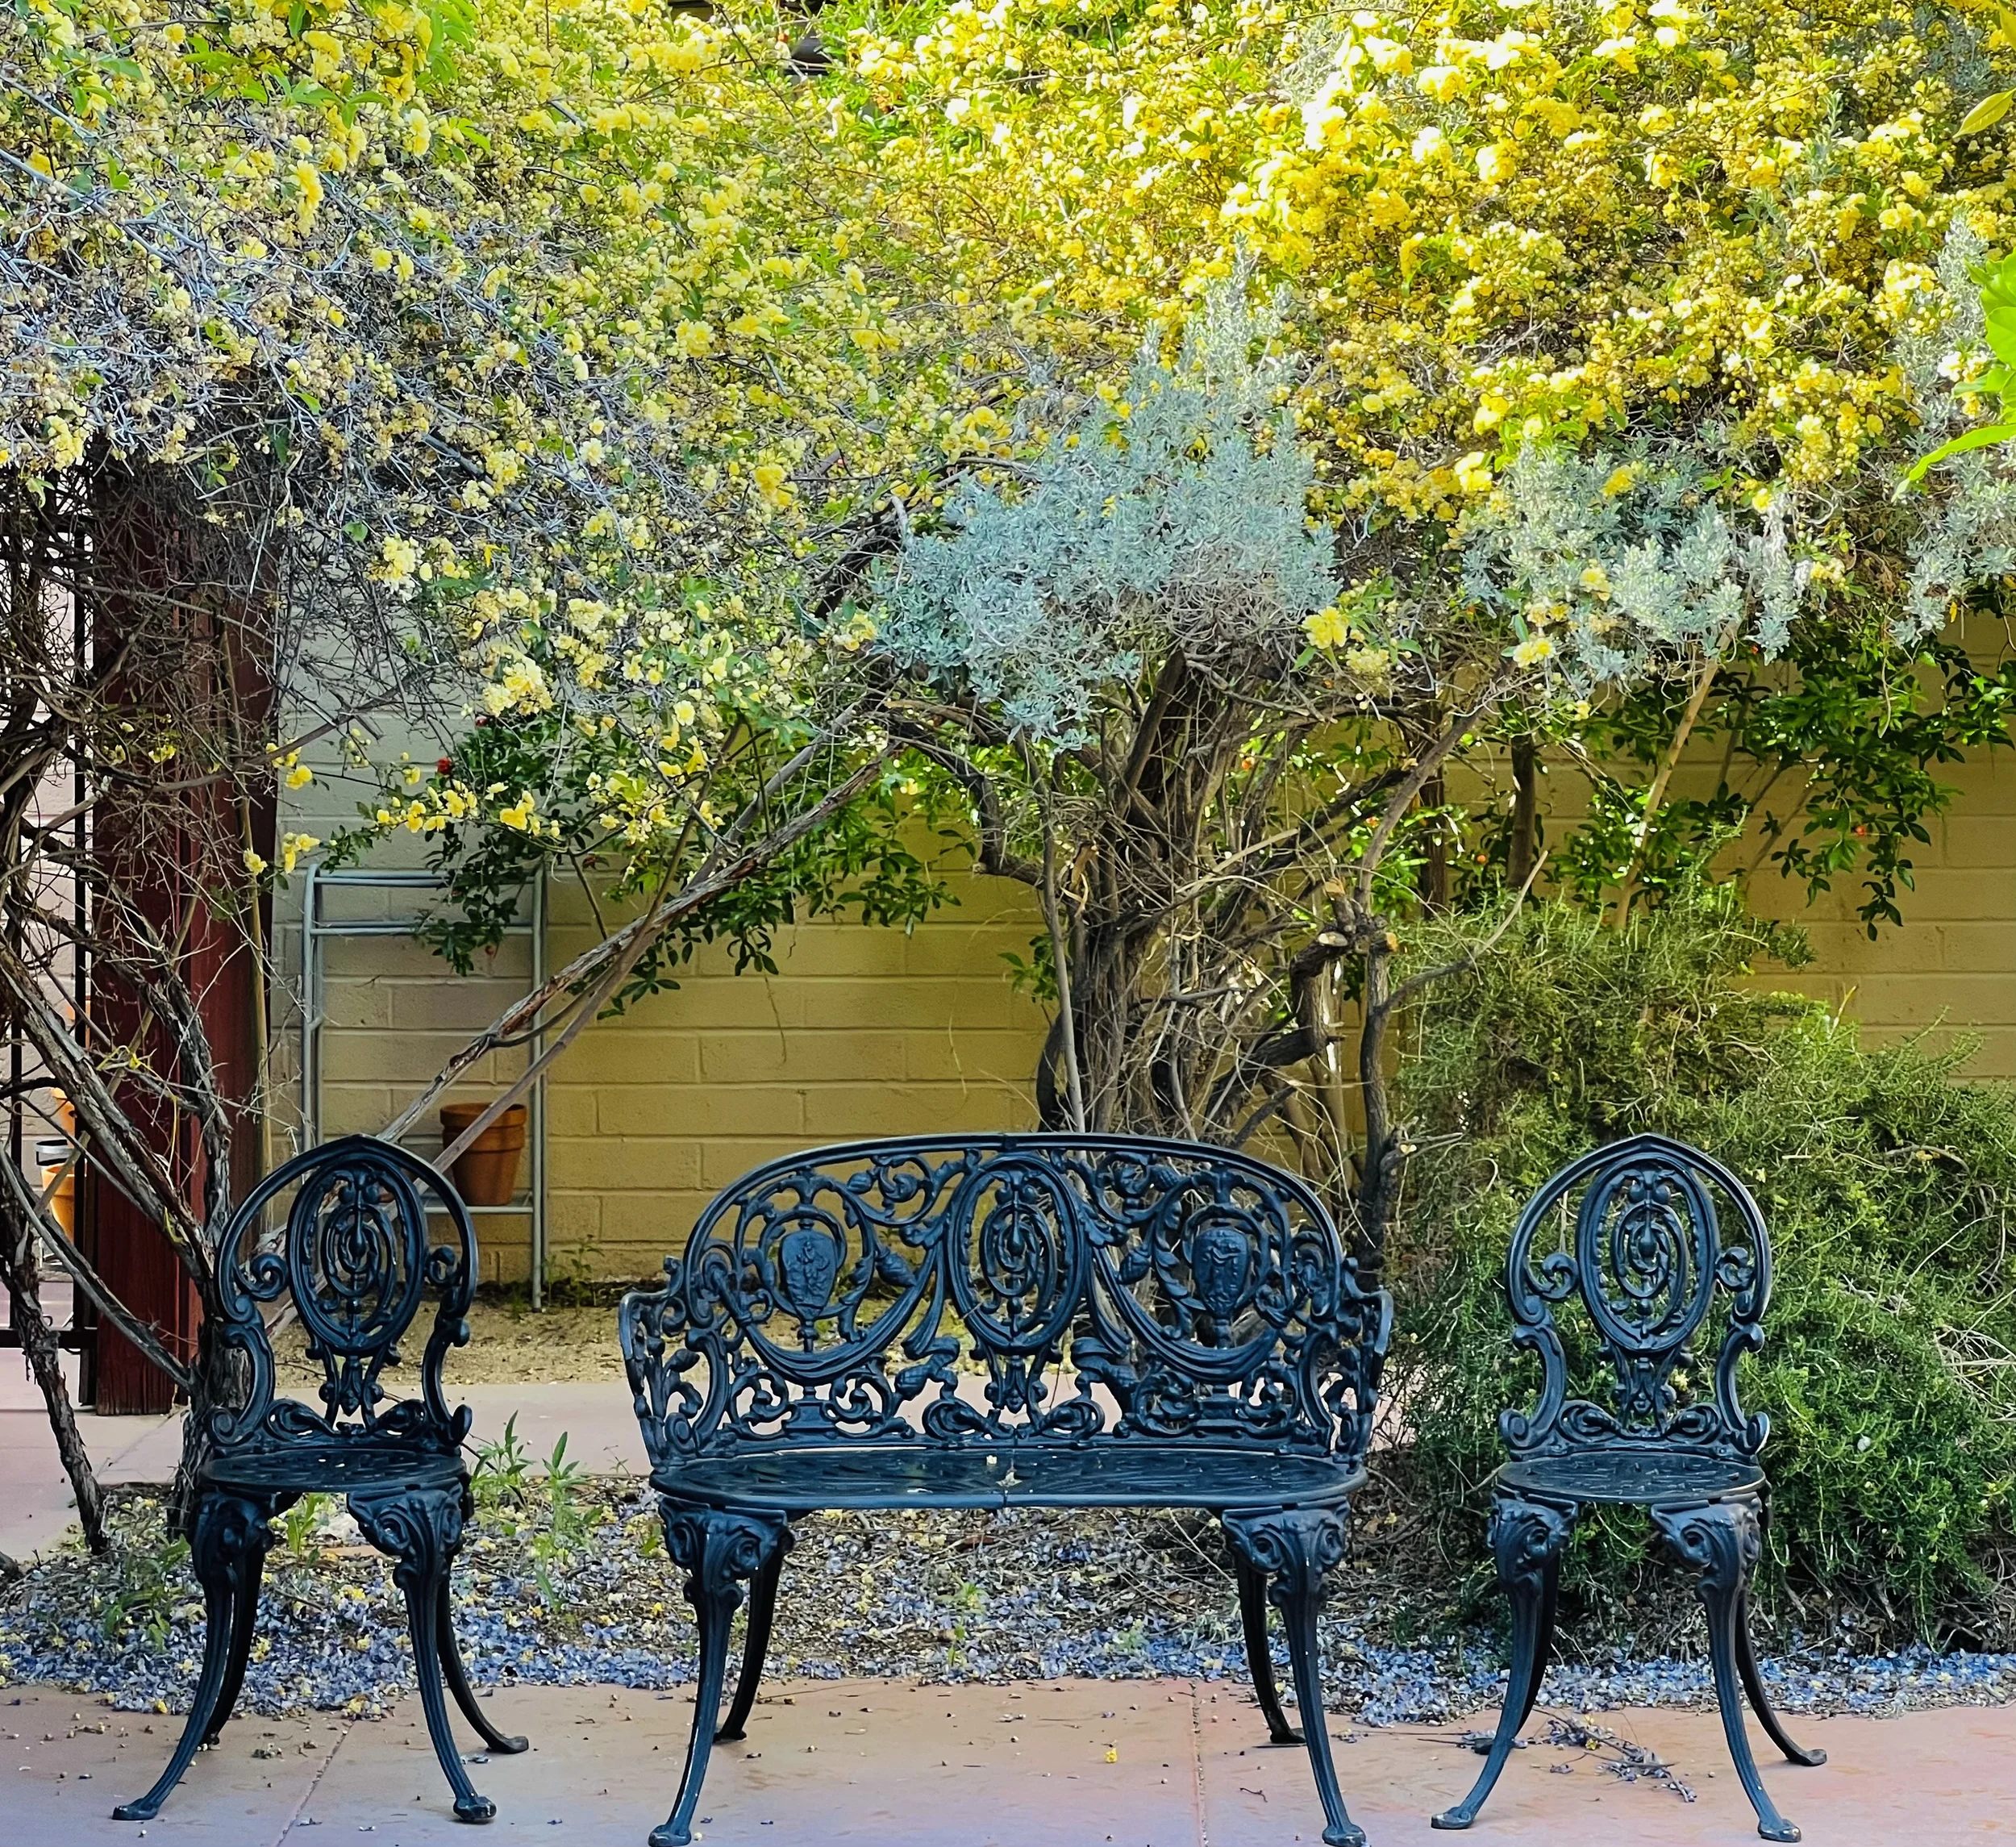 Black iron chairs with a hovering tree of small yellow roses.